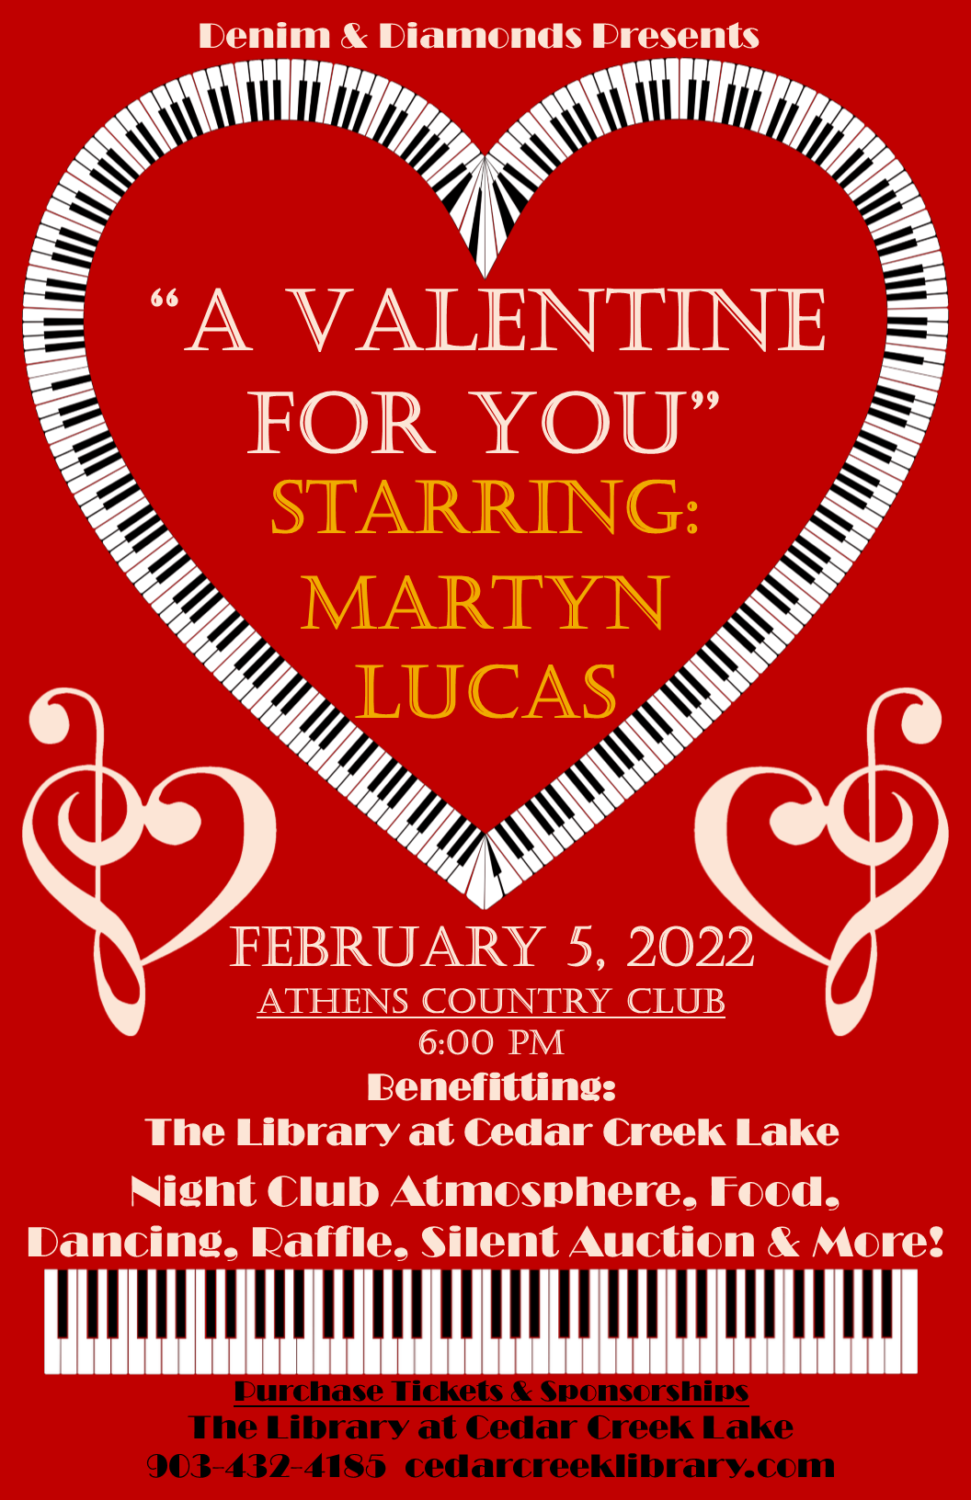 A Valentine For You Benefitting The Library at Cedar Creek Lake 2 a valentine for you poster website CedarCreekLake.Online